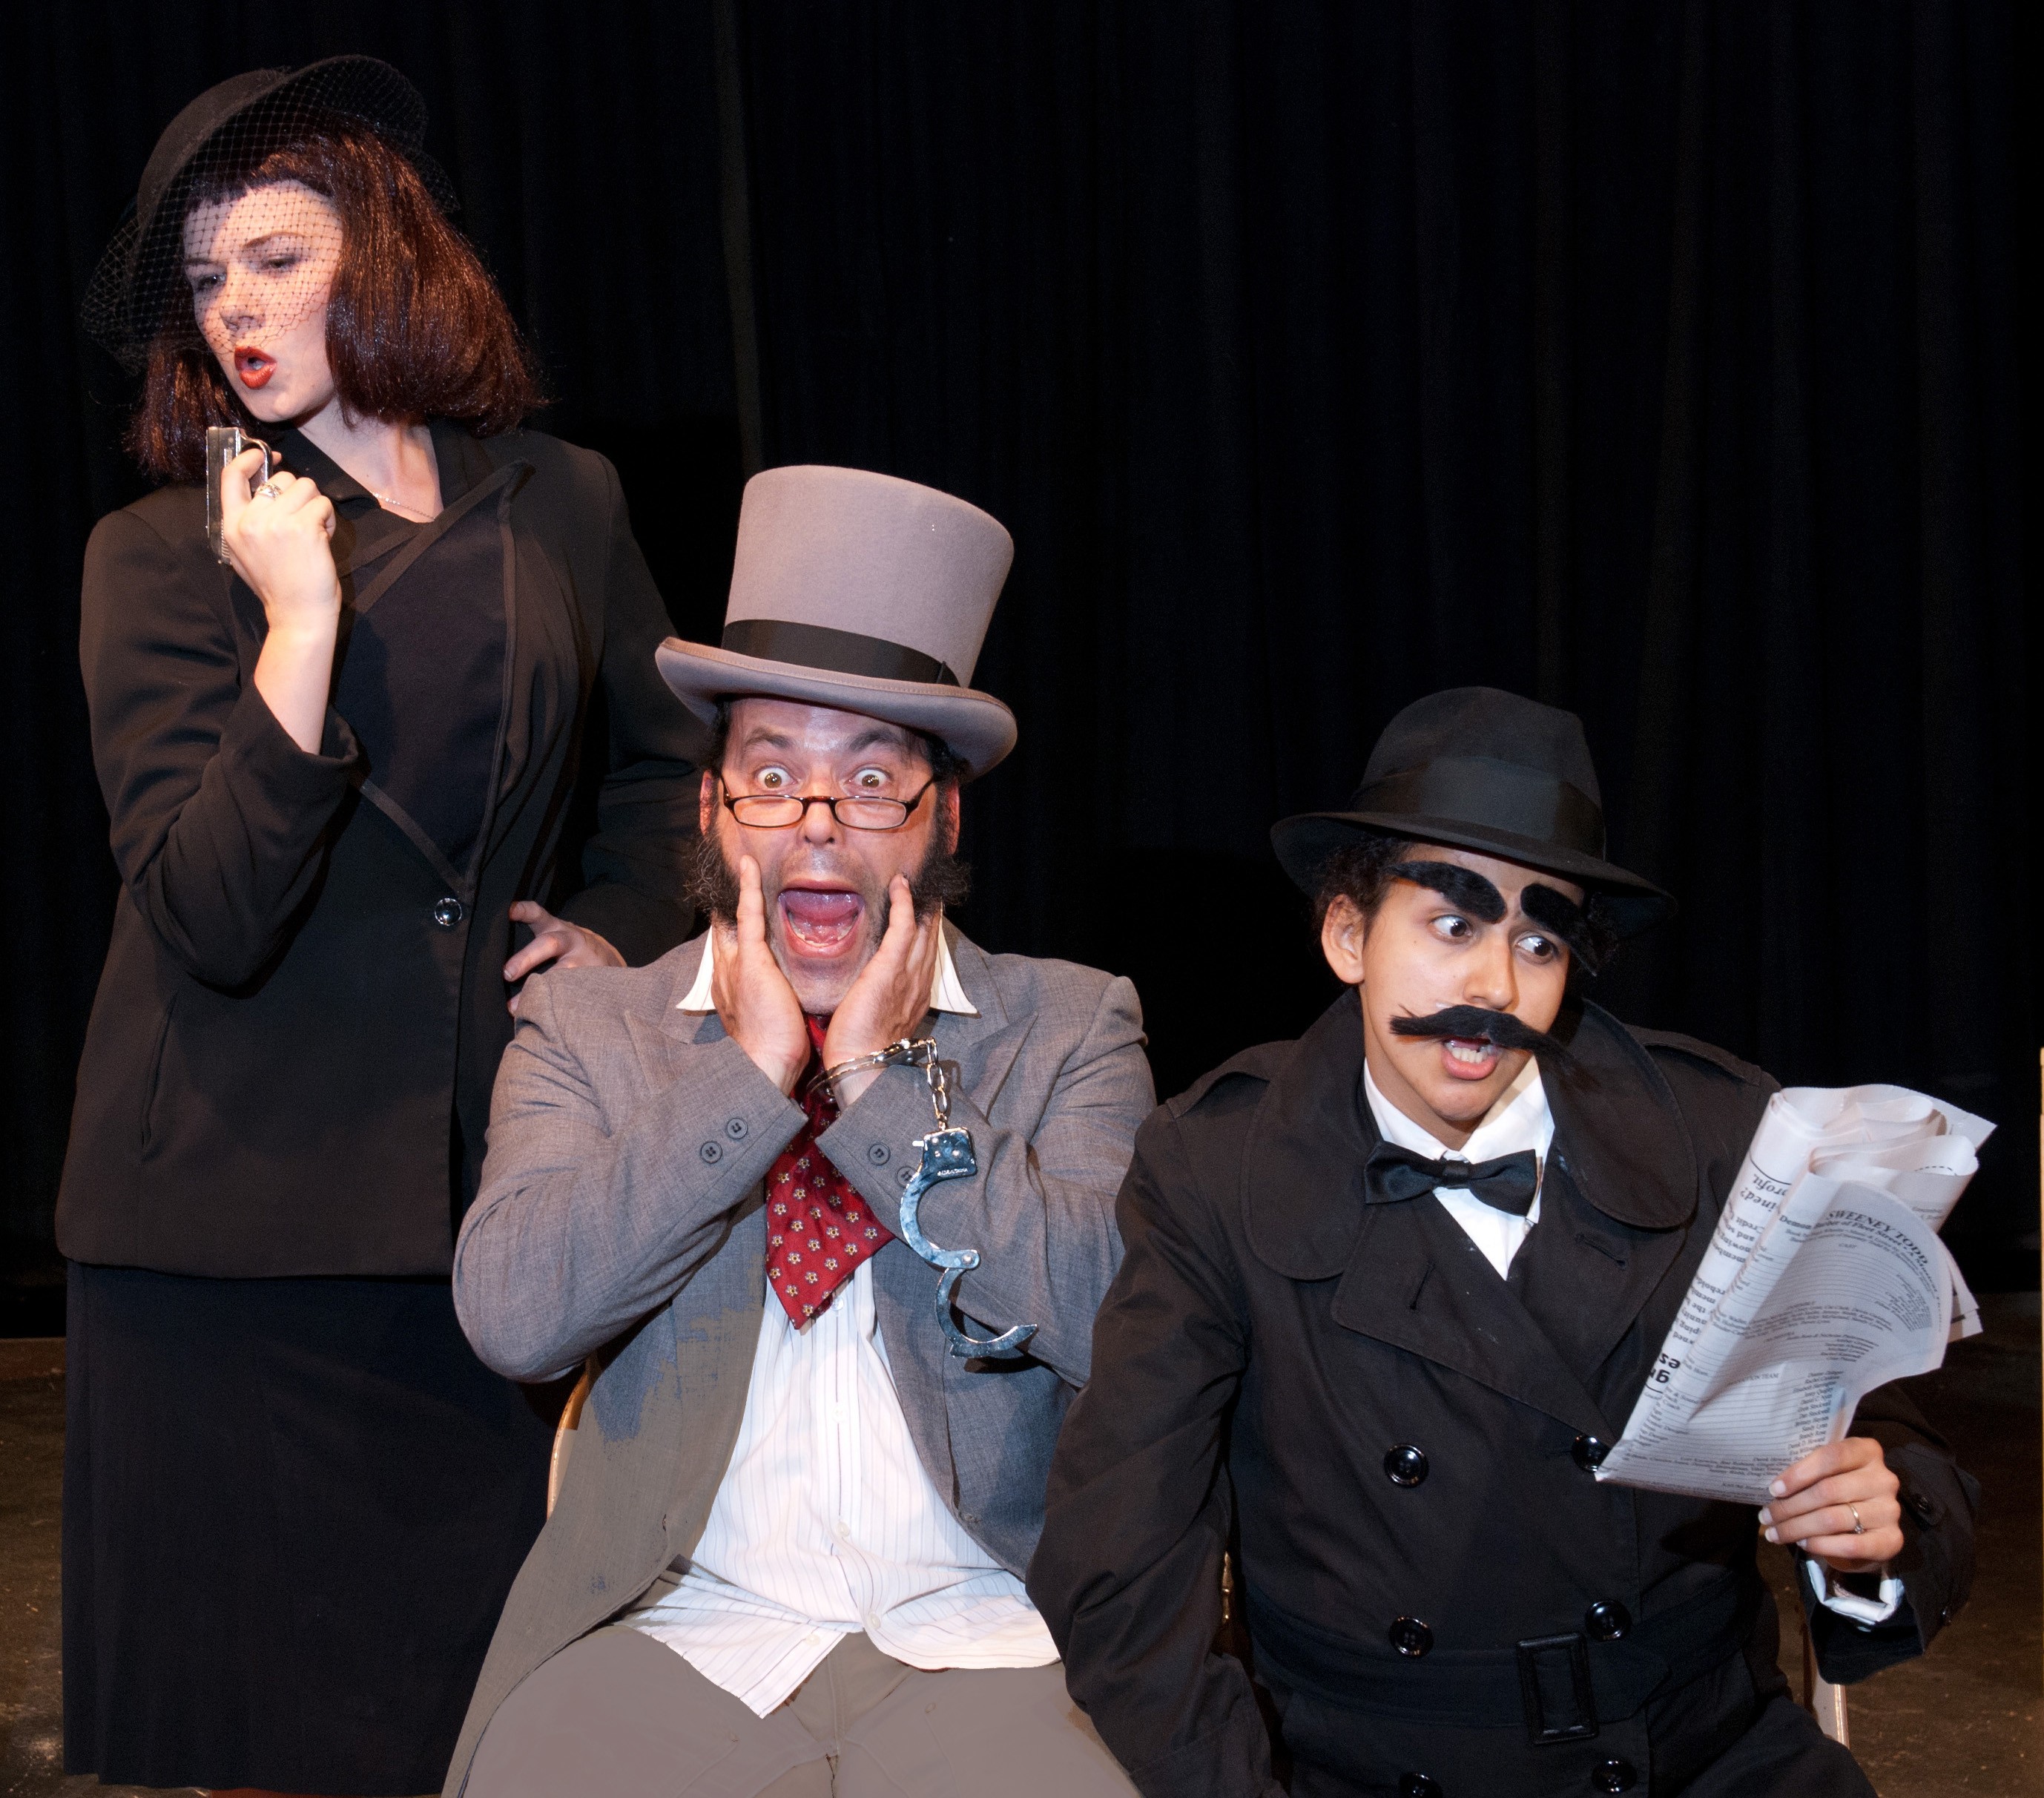 Kyra Gardner, Jeremy Webb and Millie Casillas in Ferndale Rep's The 39 Steps - COURTESY OF FERNDALE REP